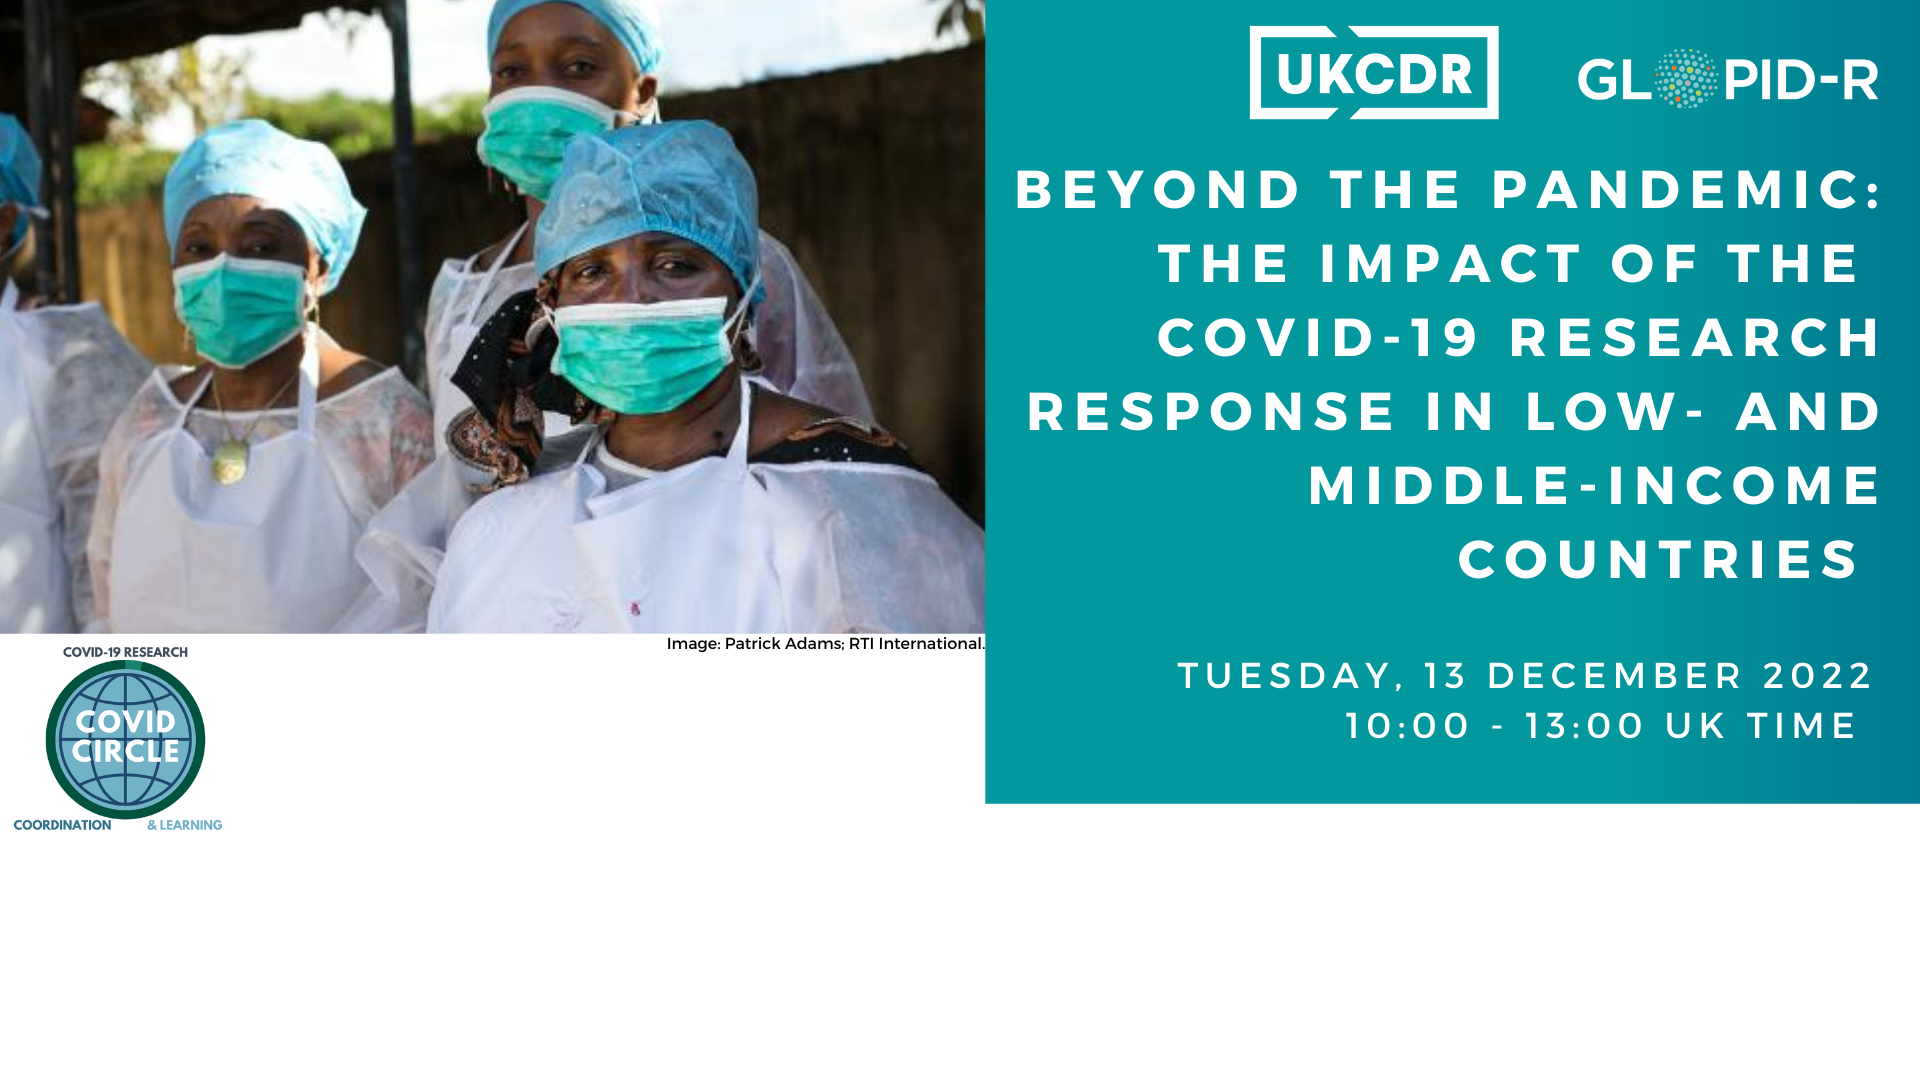 ‘Beyond the Pandemic: The Impact of COVID-19 Research Response in Low- and Middle-Income Countries’